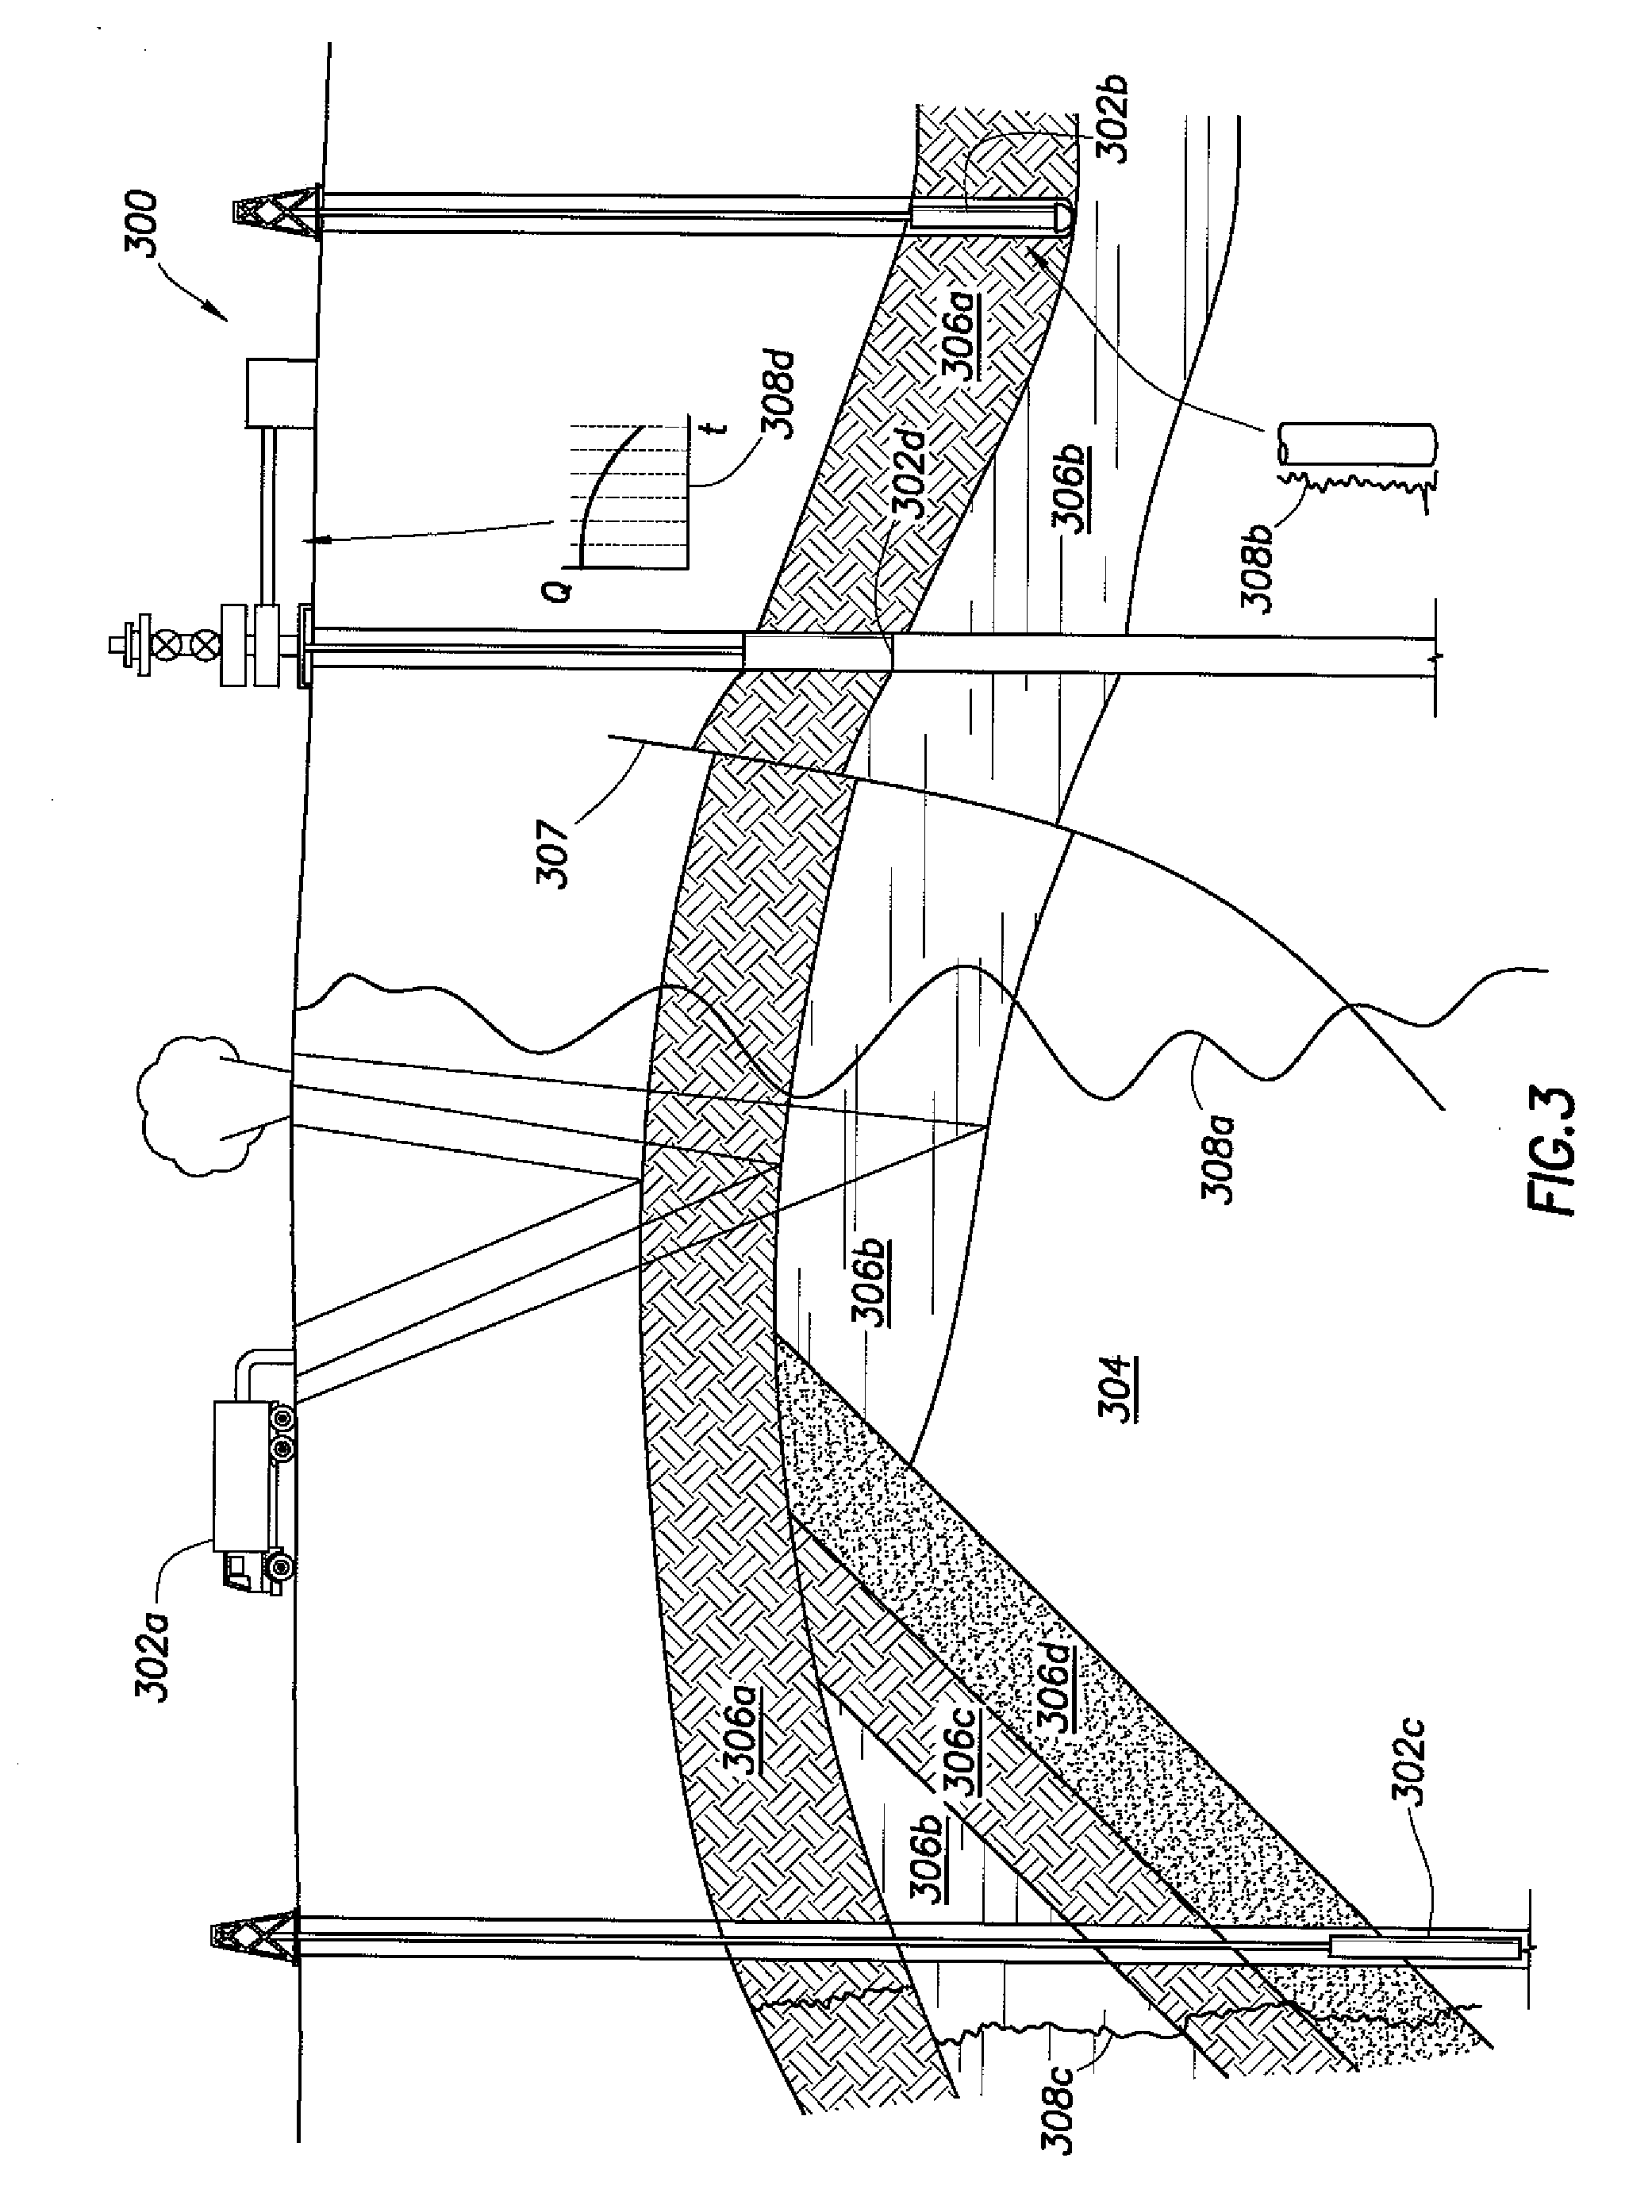 Method for performing oilfield production operations